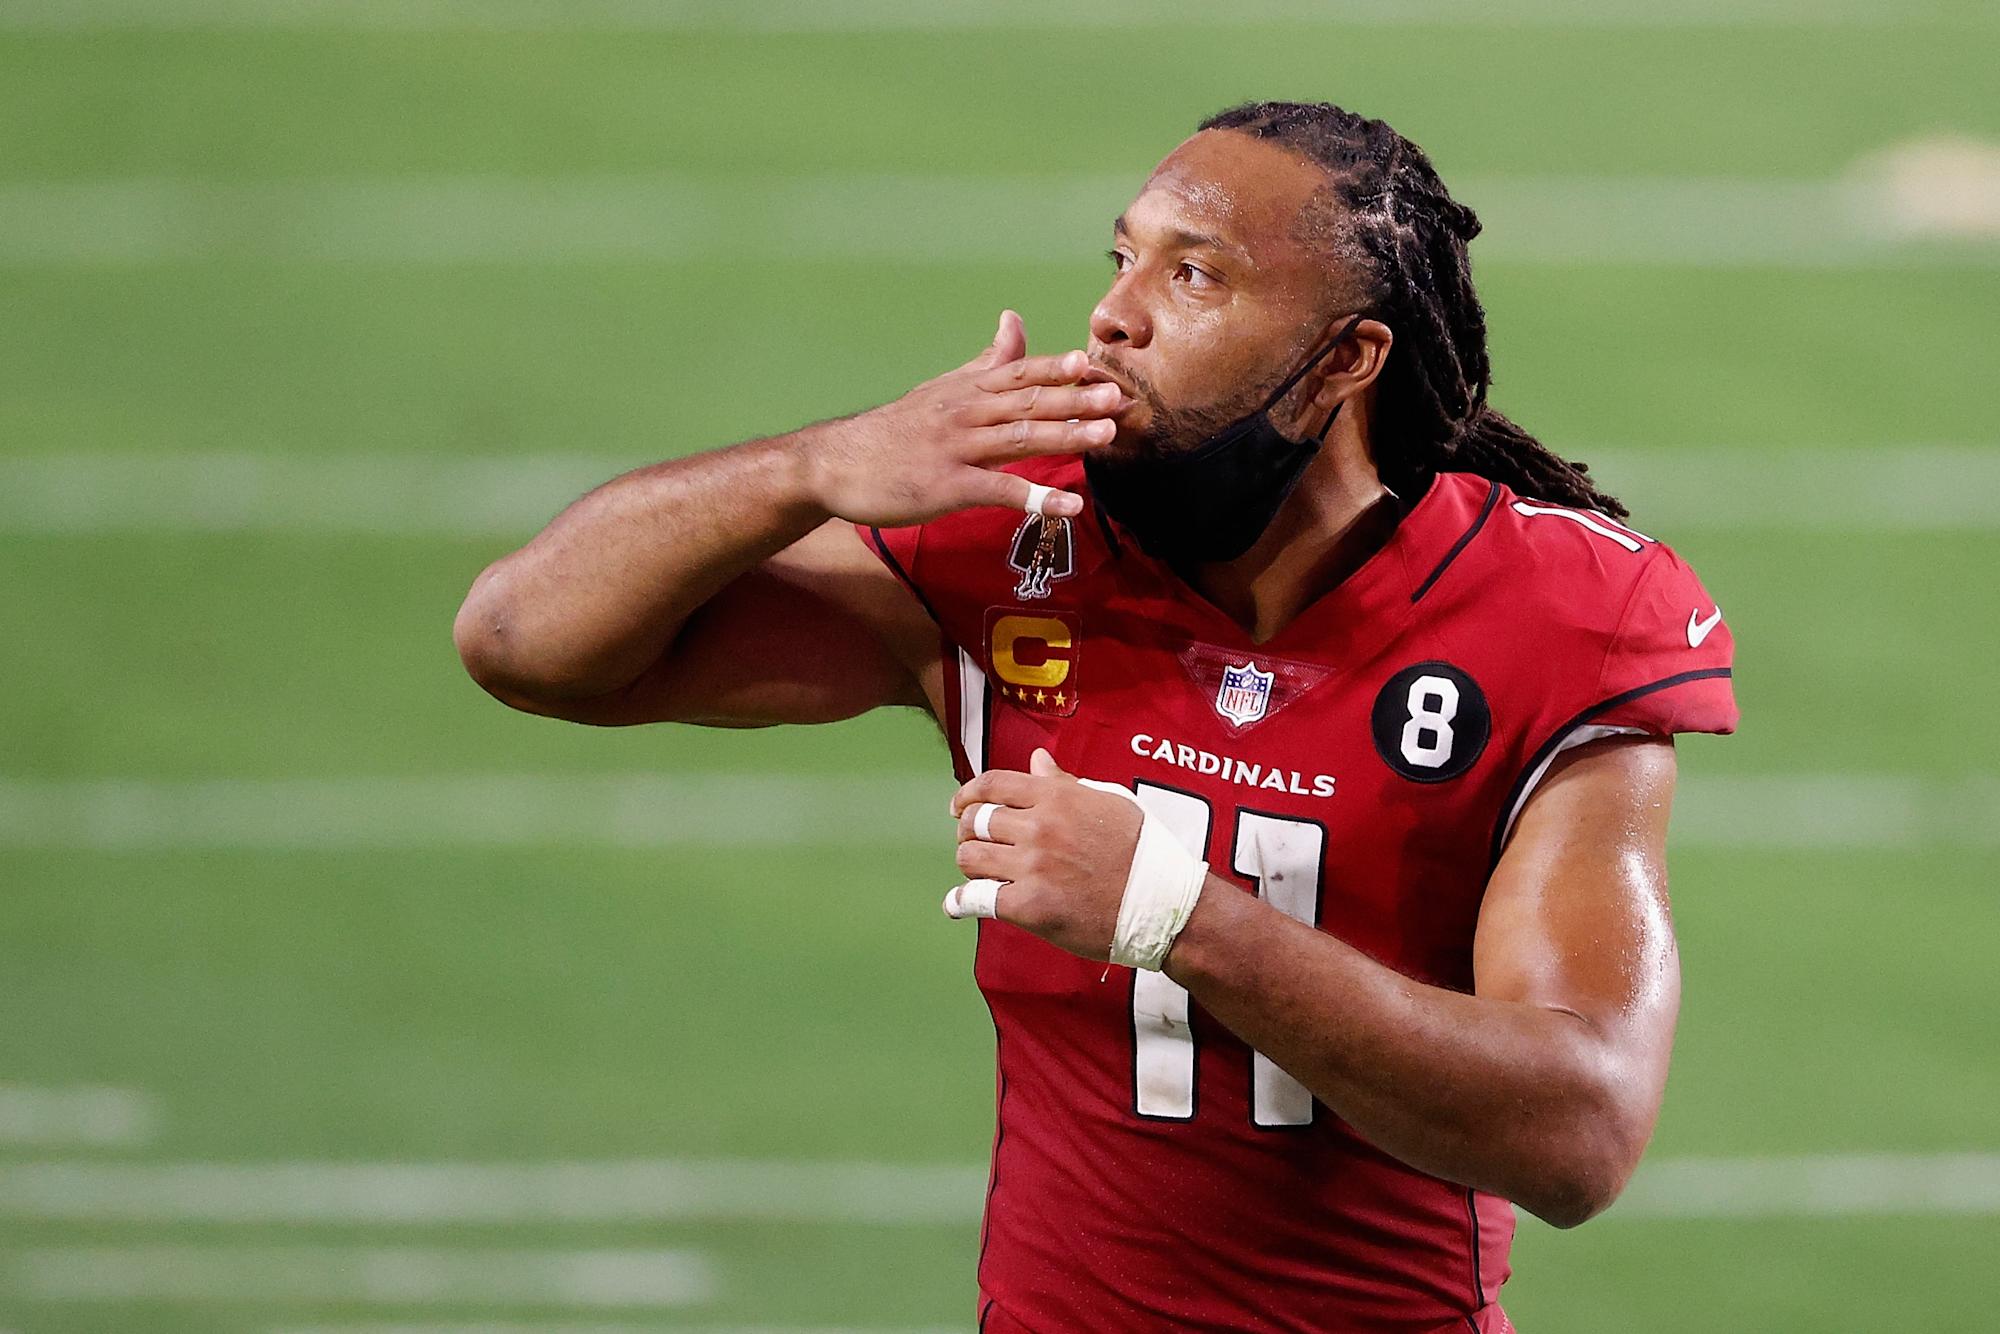 Cardinals legend Larry Fitzgerald hasn’t decided whether he wants to return for 18th season